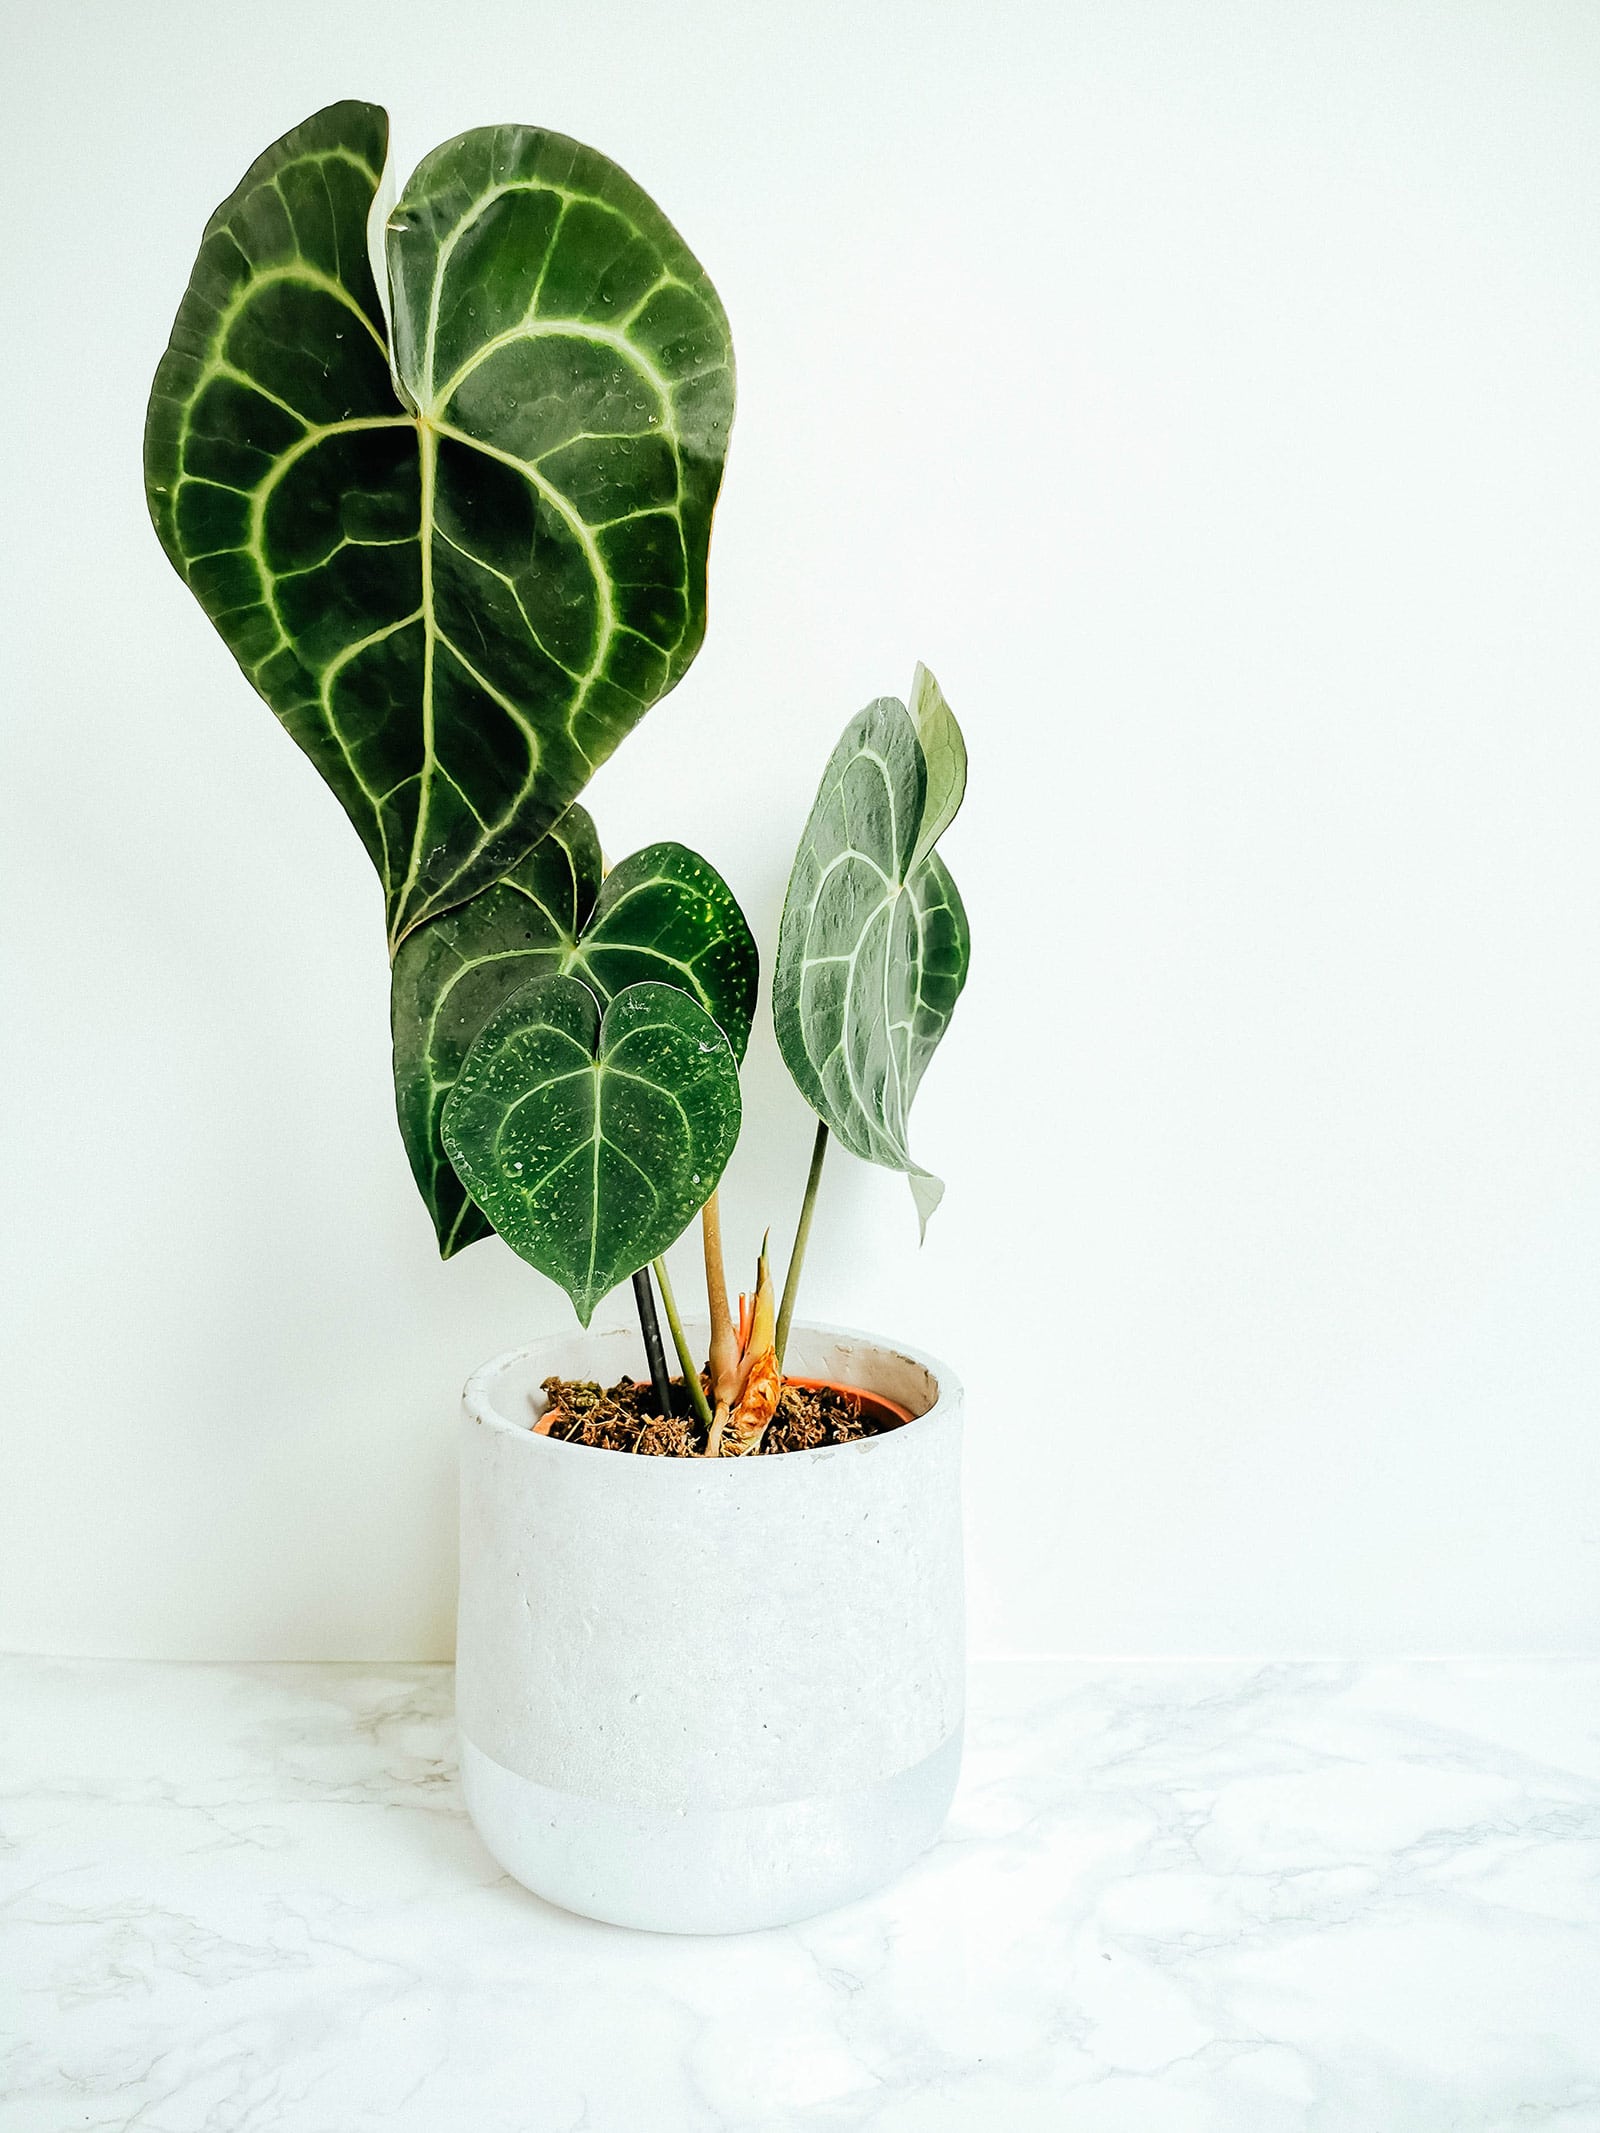 Anthurium clarinervium houseplant in a white ceramic pot on a white marble table, set against a white wall